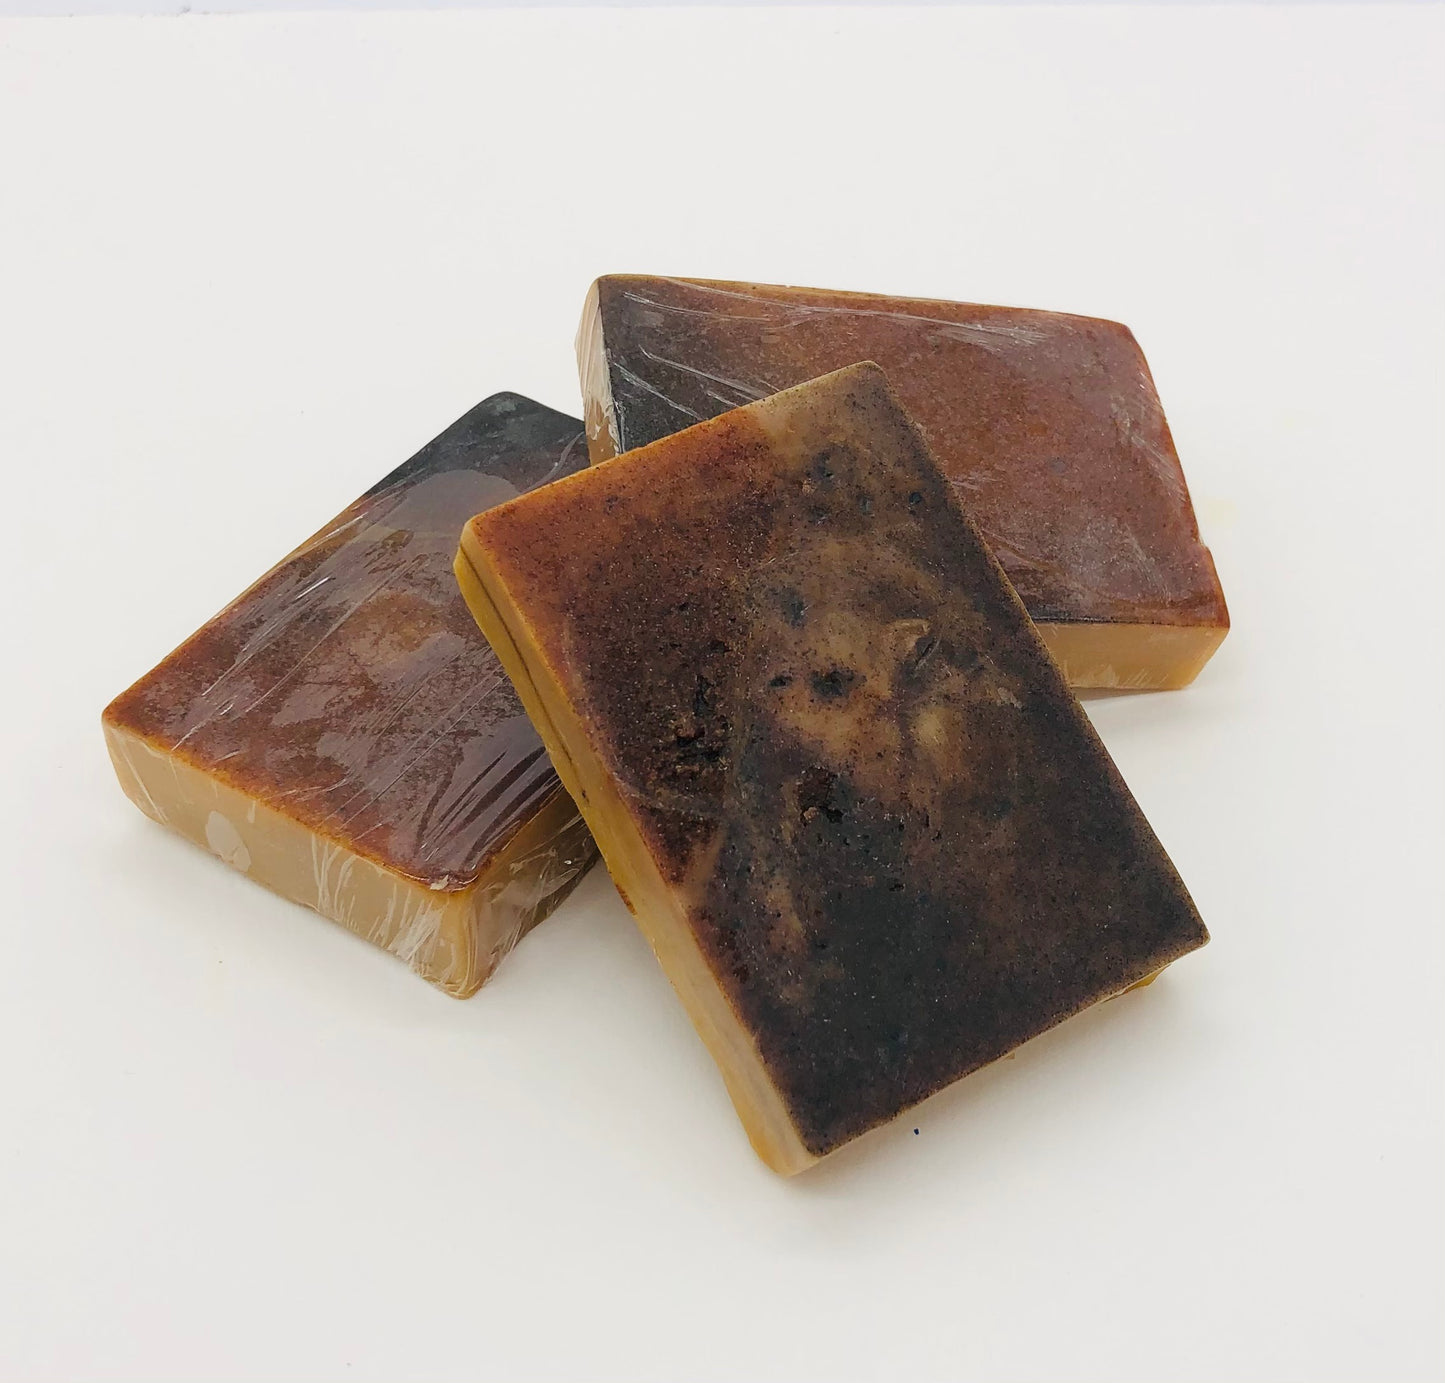 Three bars of soap with a caramel colored base and a mottled brown top layer .